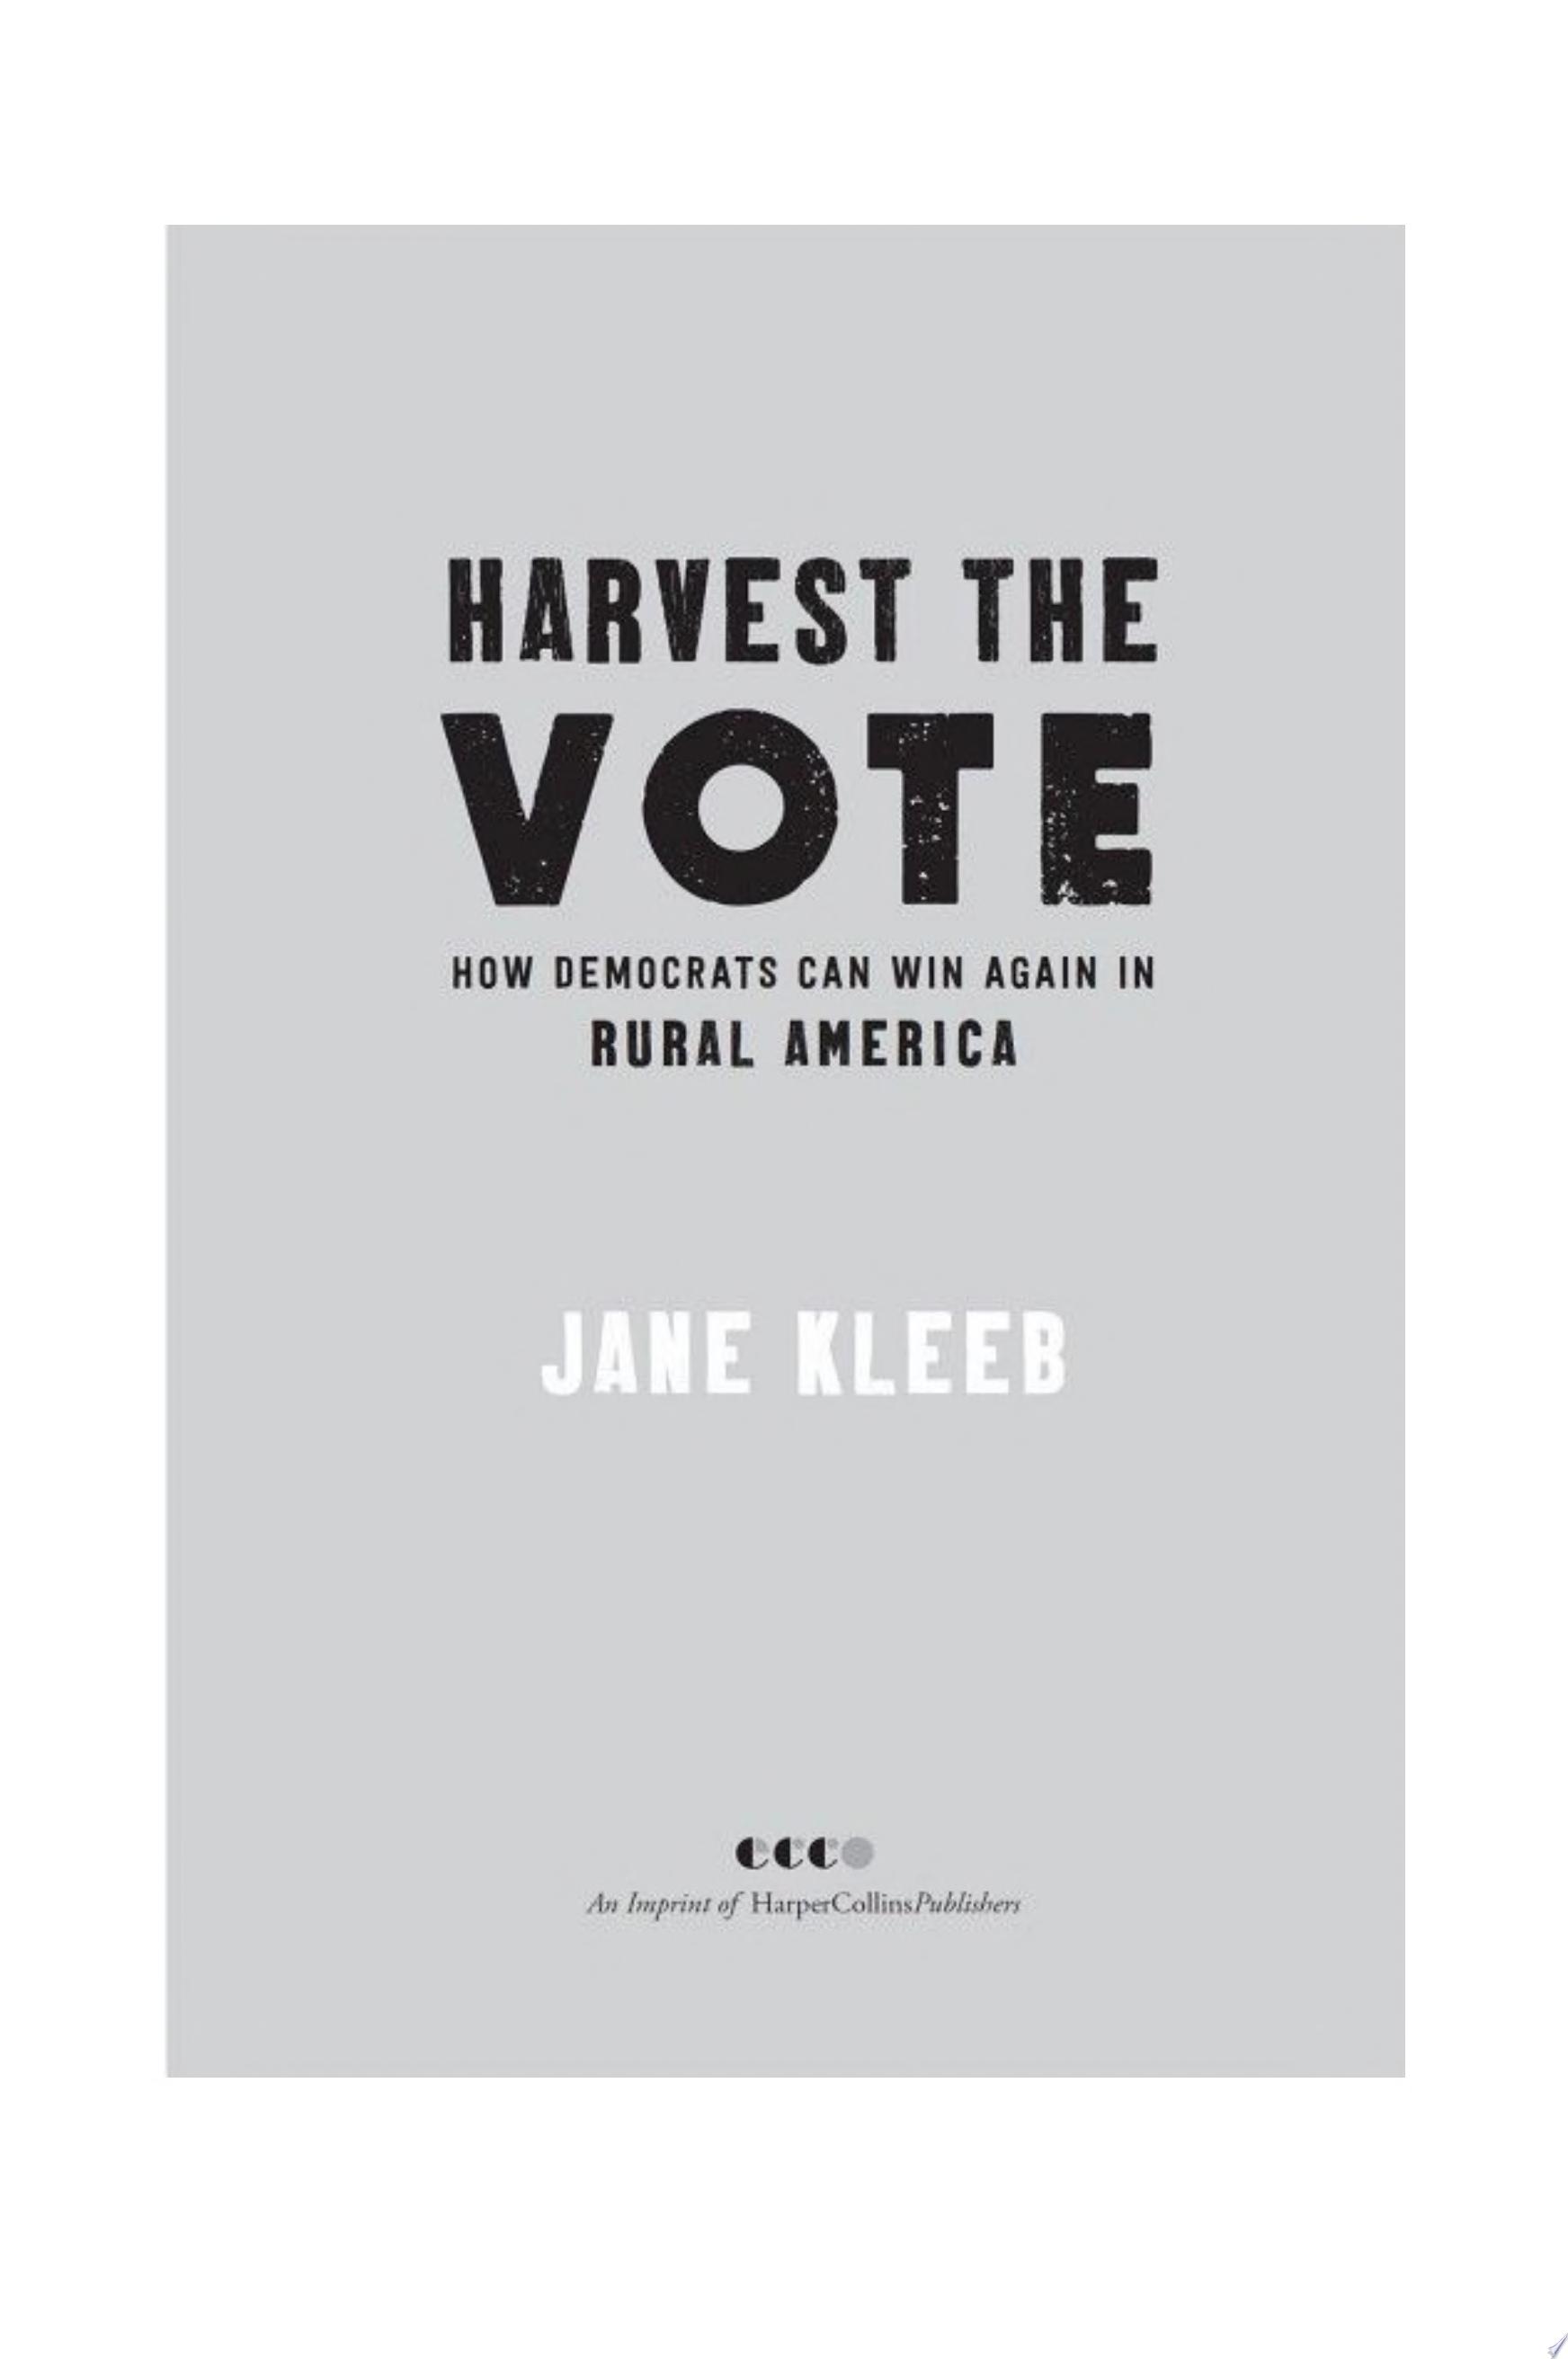 Image for "Harvest the Vote"